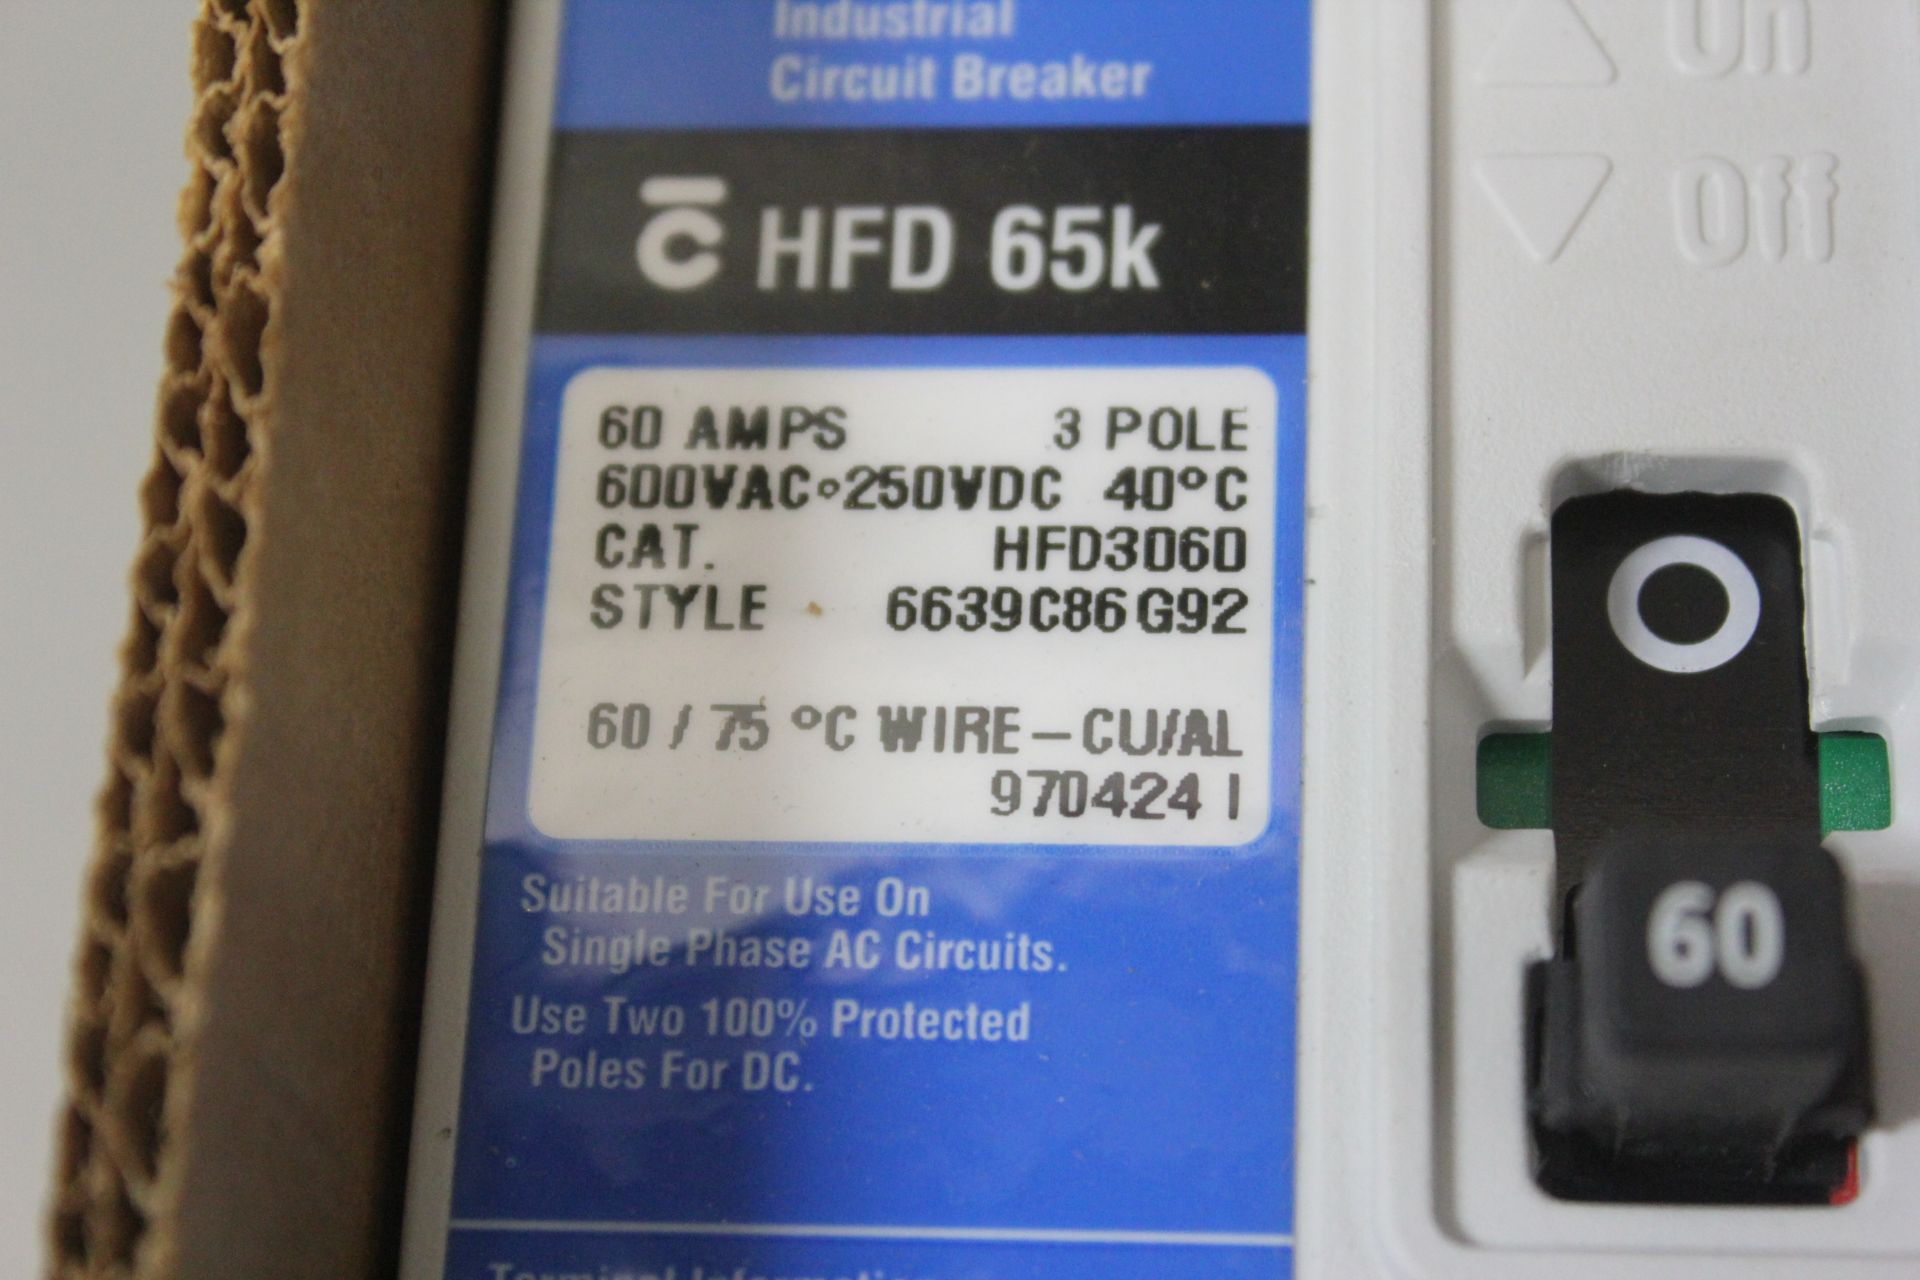 NEW CUTLER HAMMER 60A INDUSTRIAL CIRCUIT BREAKER - Image 3 of 3